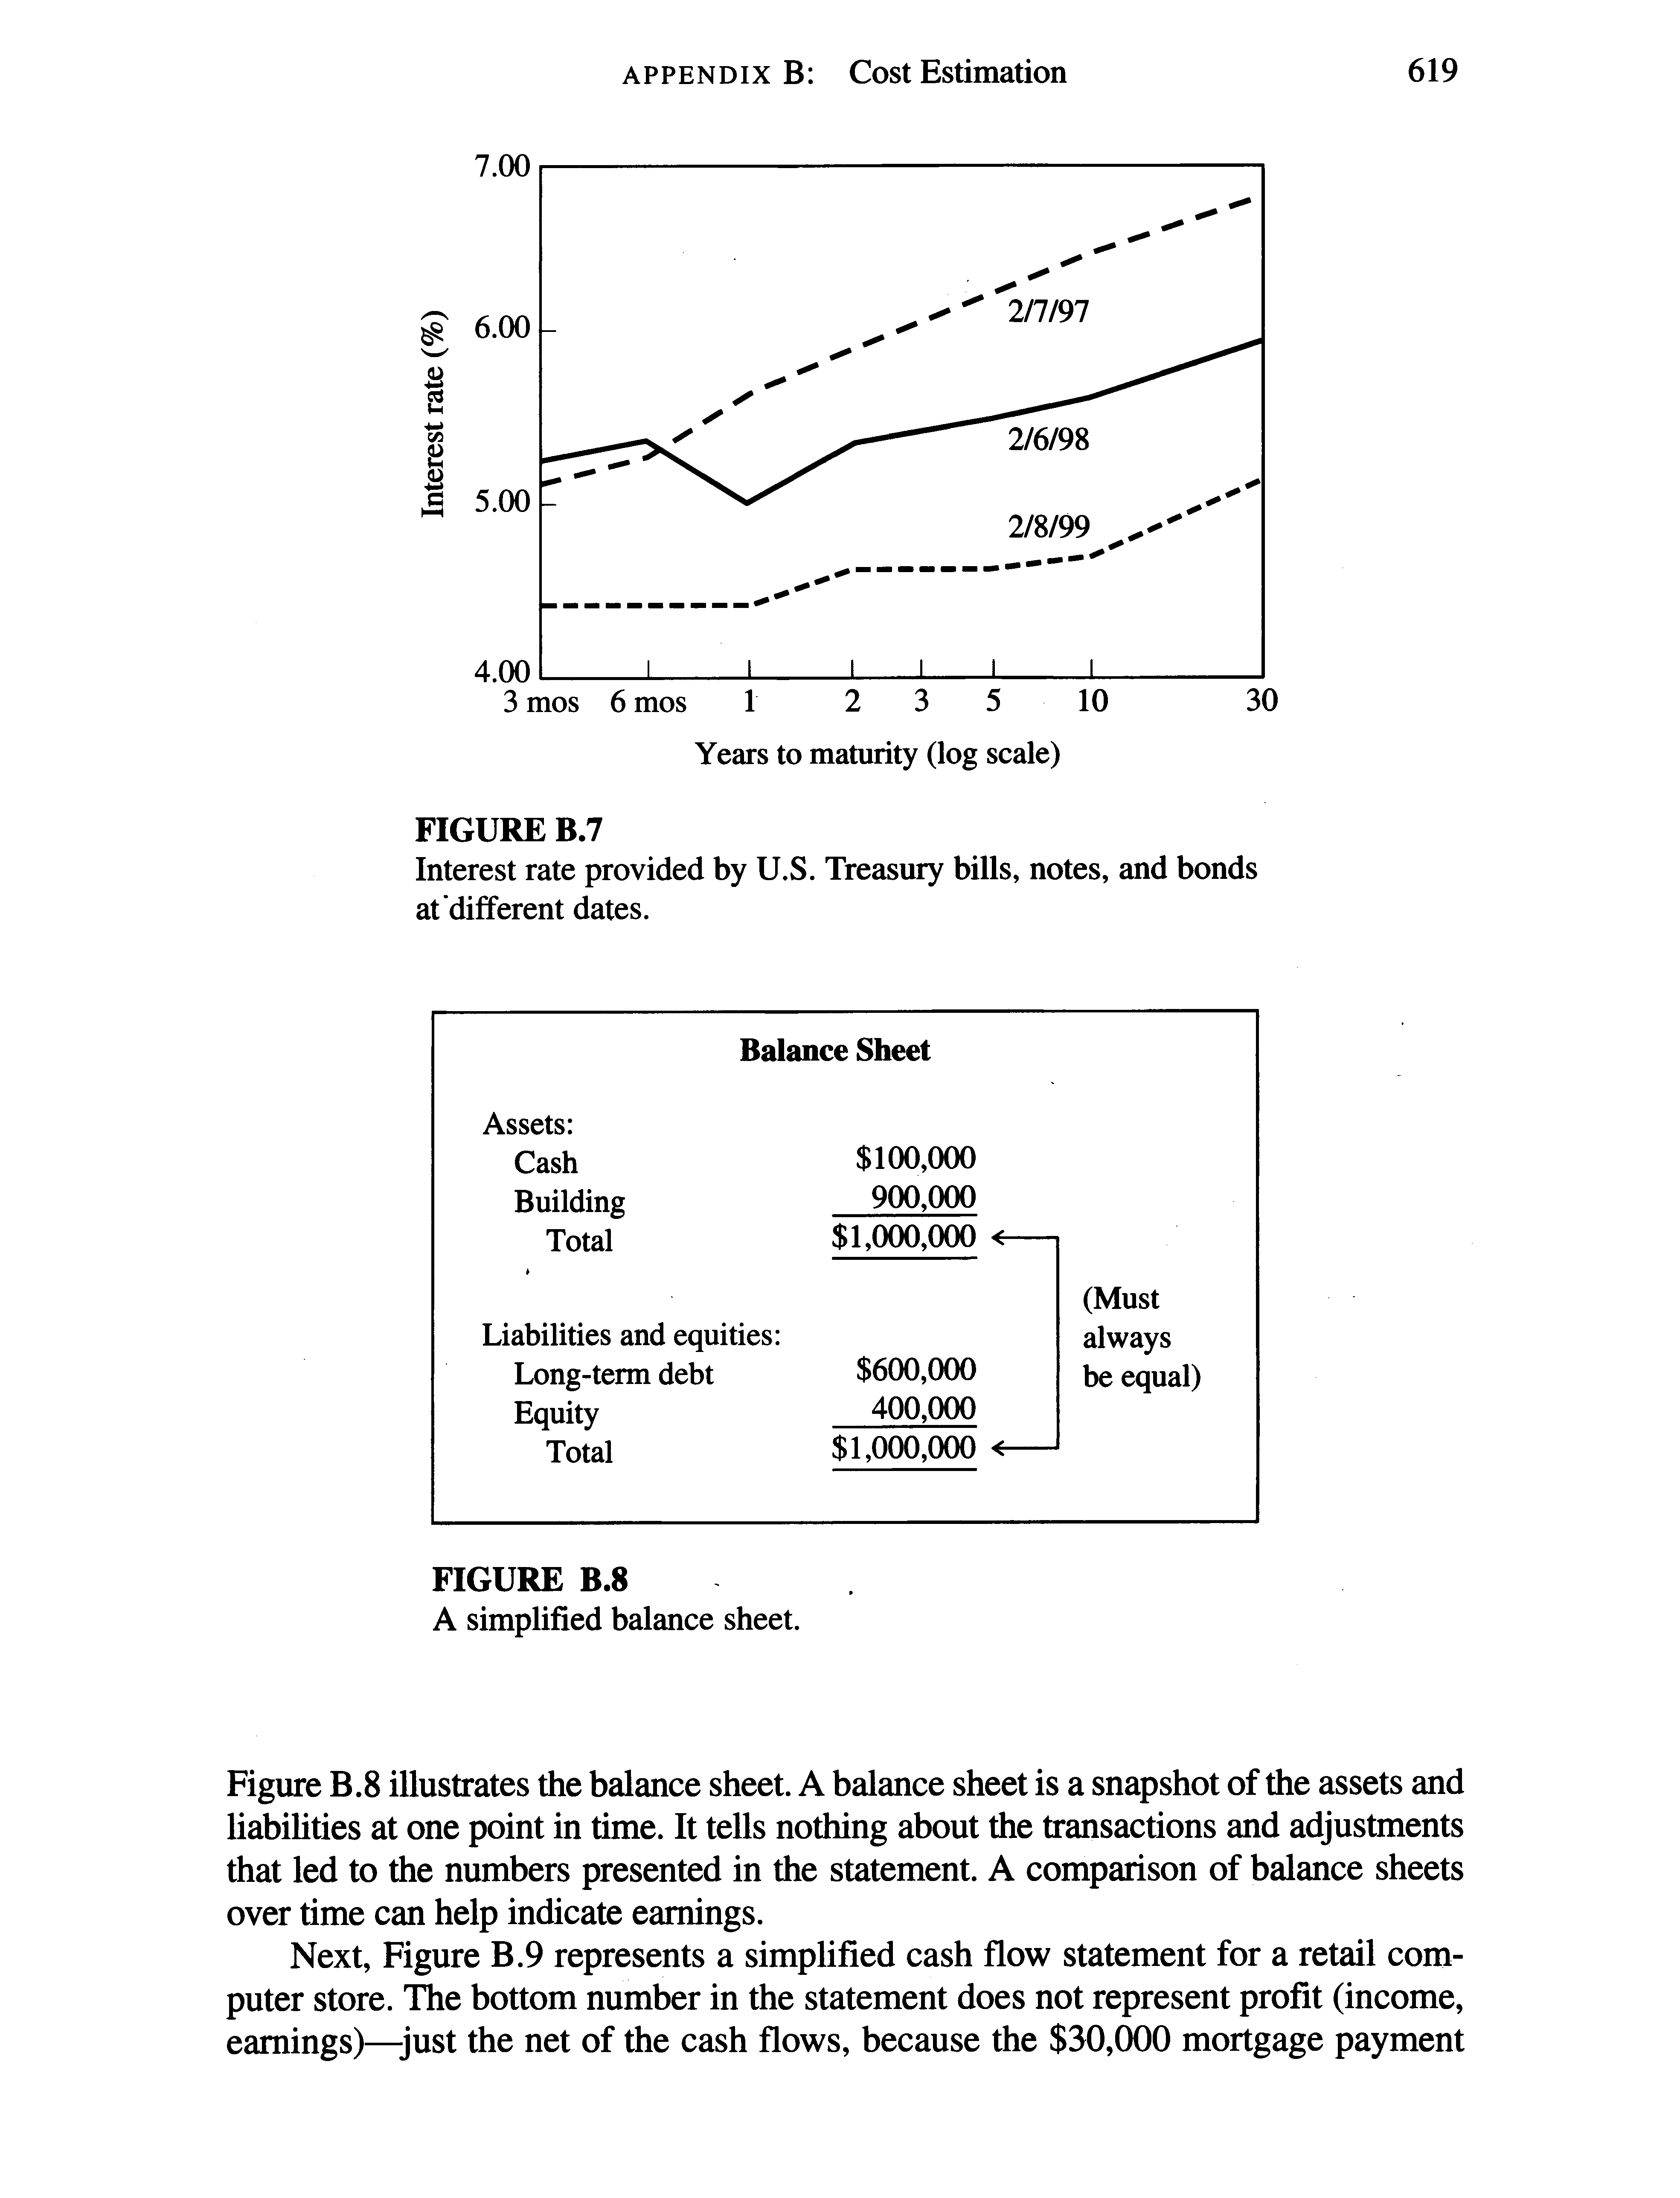 Figure B.8 illustrates the balance sheet. A balance sheet is a snapshot of the assets and liabilities at one point in time. It tells nothing about the transactions and adjustments that led to the numbers presented in the statement. A comparison of balance sheets over time can help indicate earnings.